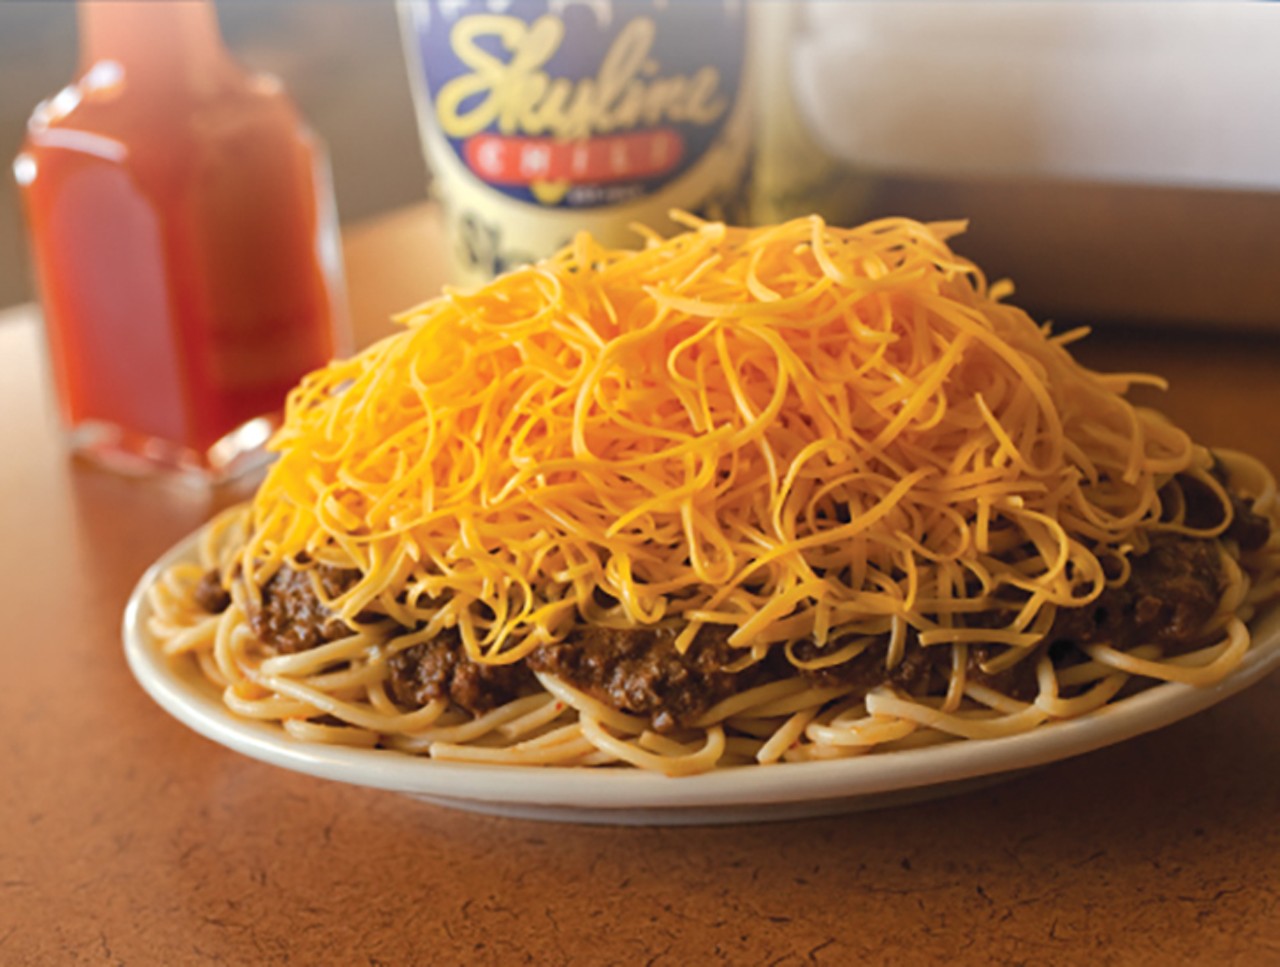 Have a 3-way, it&#146;s Skyline Time
Multiple Locations
Pure and simple, Skyline is a Cincinnati staple. This Cincinnati-style chili literally warms your soul. Load up your spaghetti with chili, cheese, onions and beans for a &#147;5-way&#148; or if you&#146;re more of a hotdog guy (or gal), order a coney topped with chili, cheese, onion and mustard. 
Photo via skylinechili.com